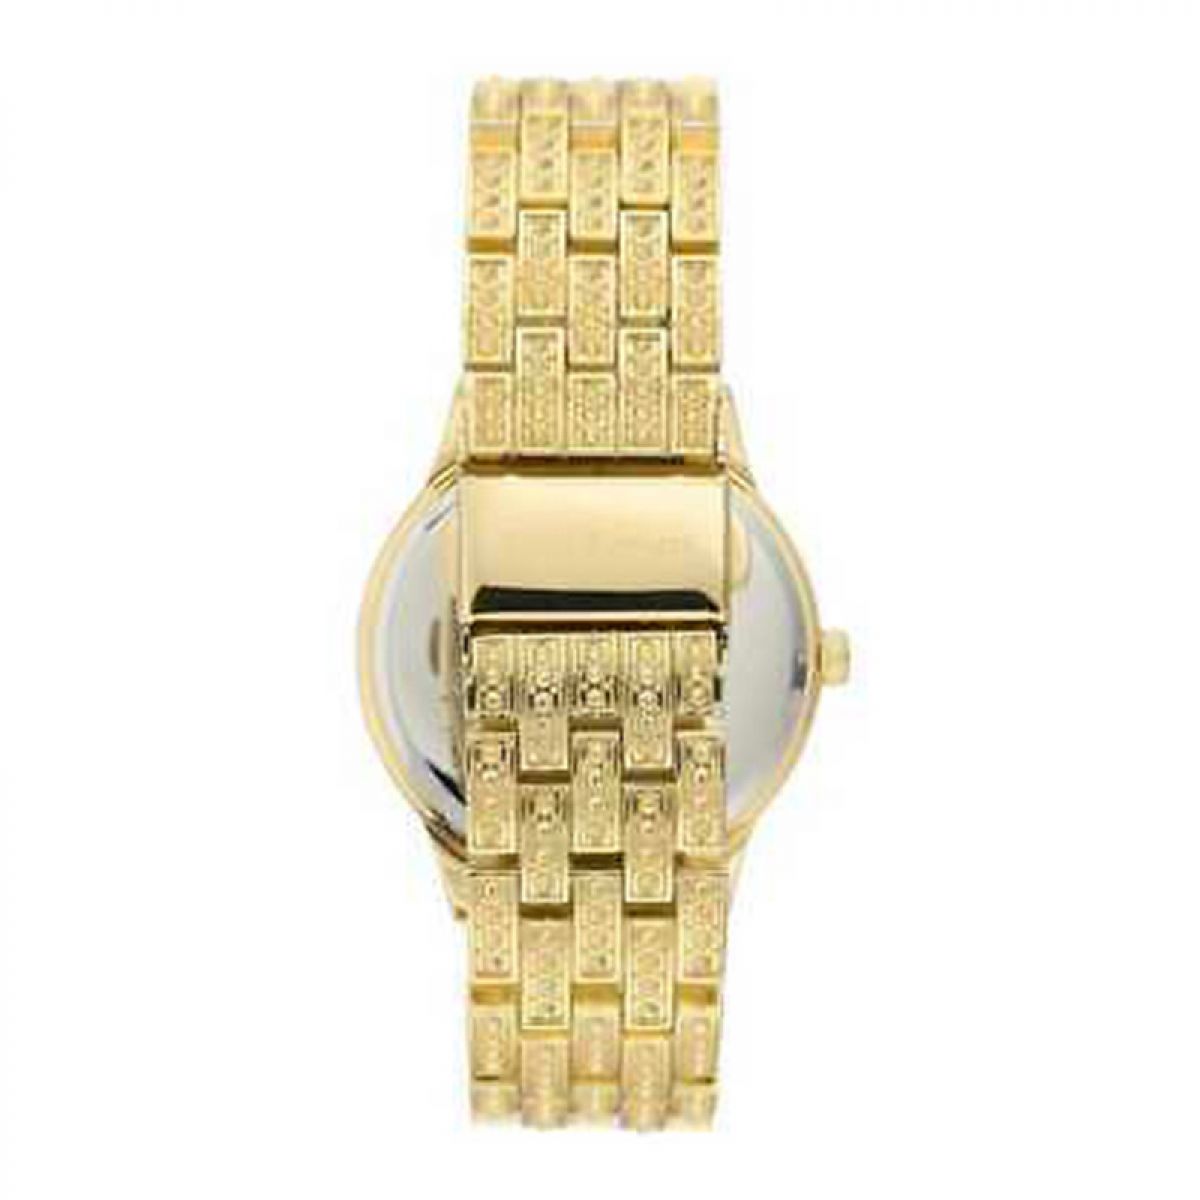 Juicy Couture Horloge JC/1138PVGB Dames 38mm